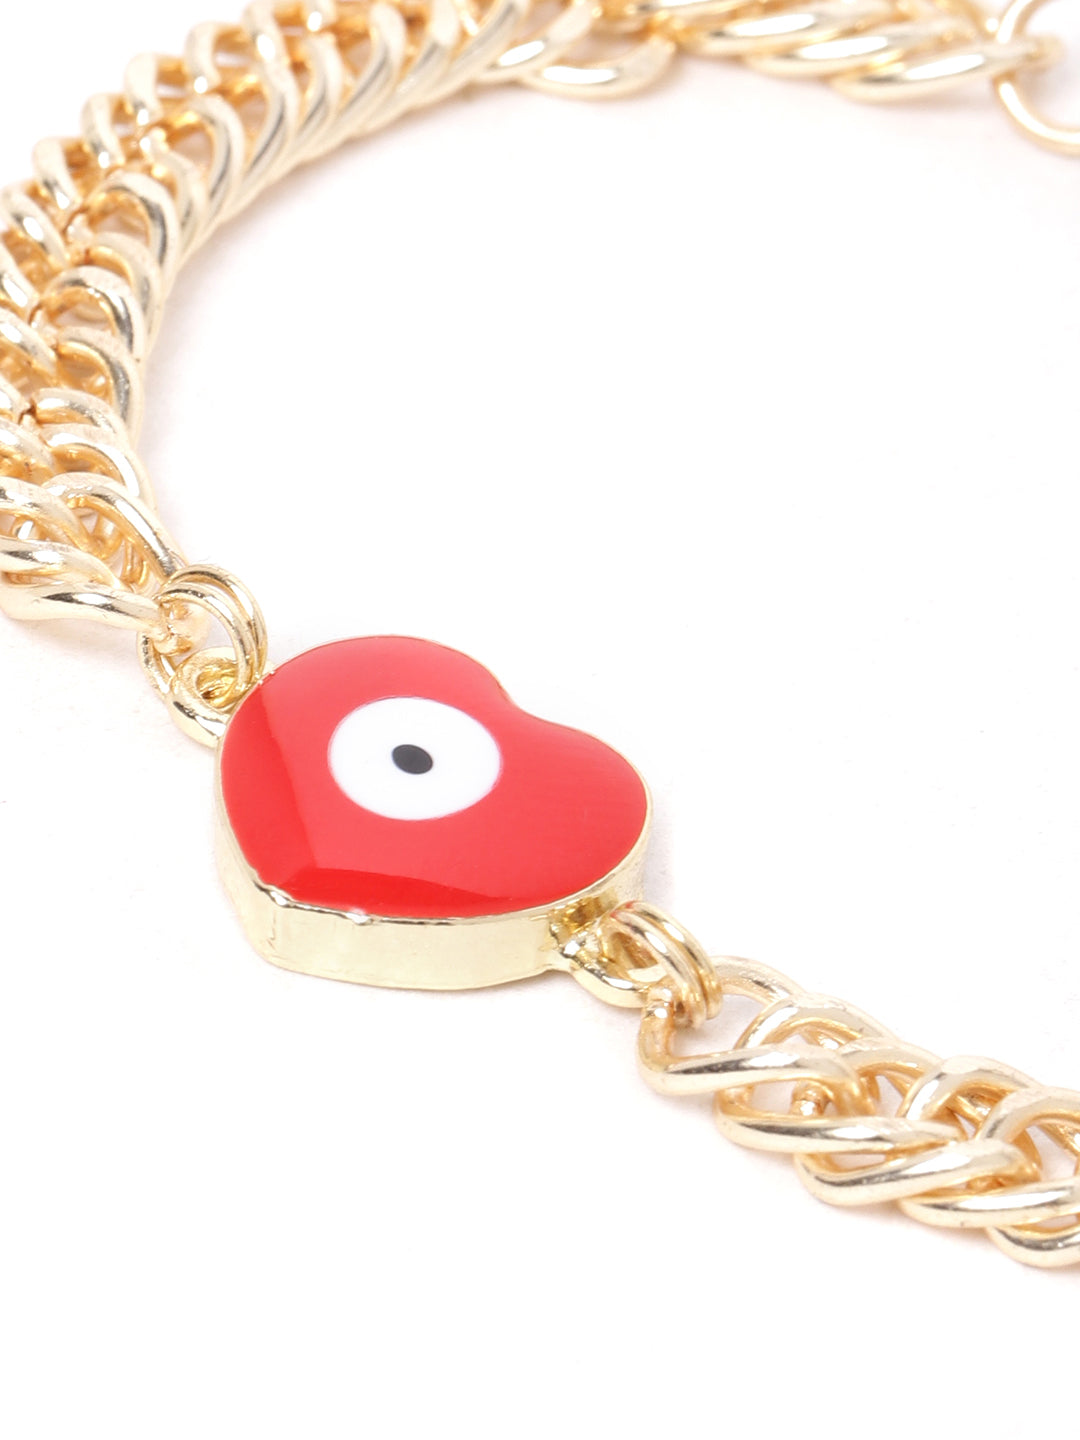 Gold chain with a red evil eye pendant on Craiyon